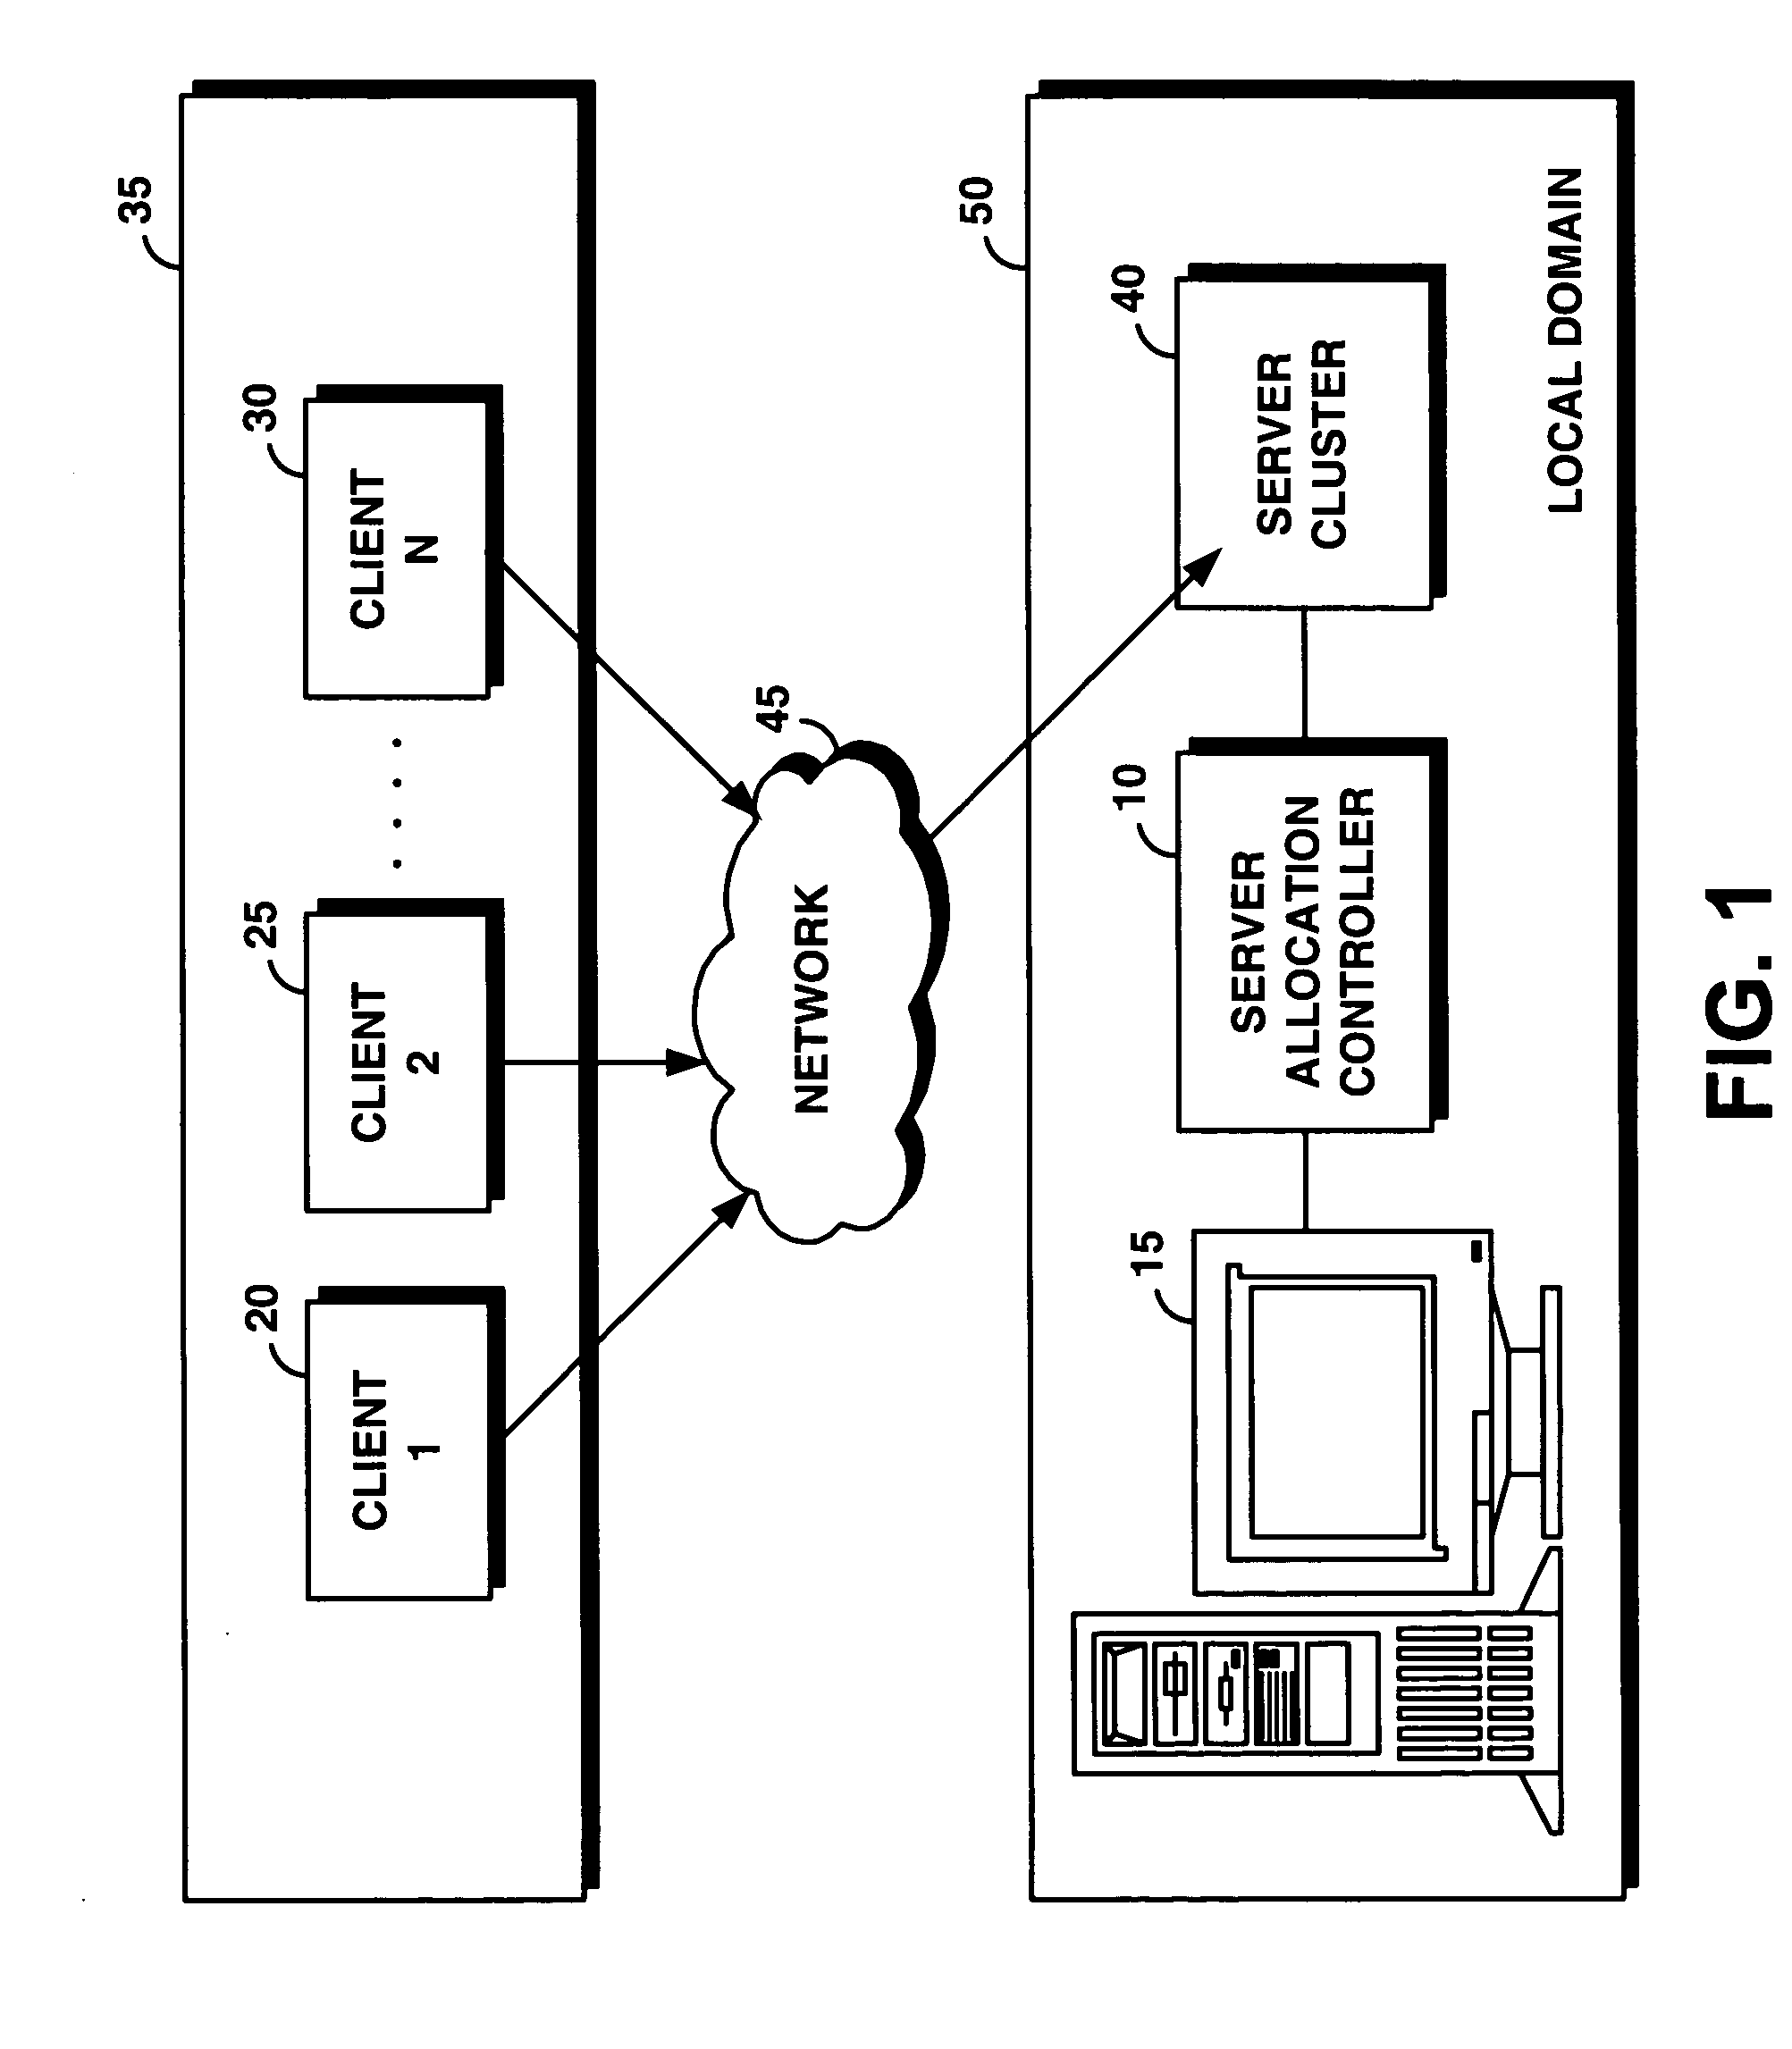 System and method for supporting transaction and parallel services in a clustered system based on a service level agreement